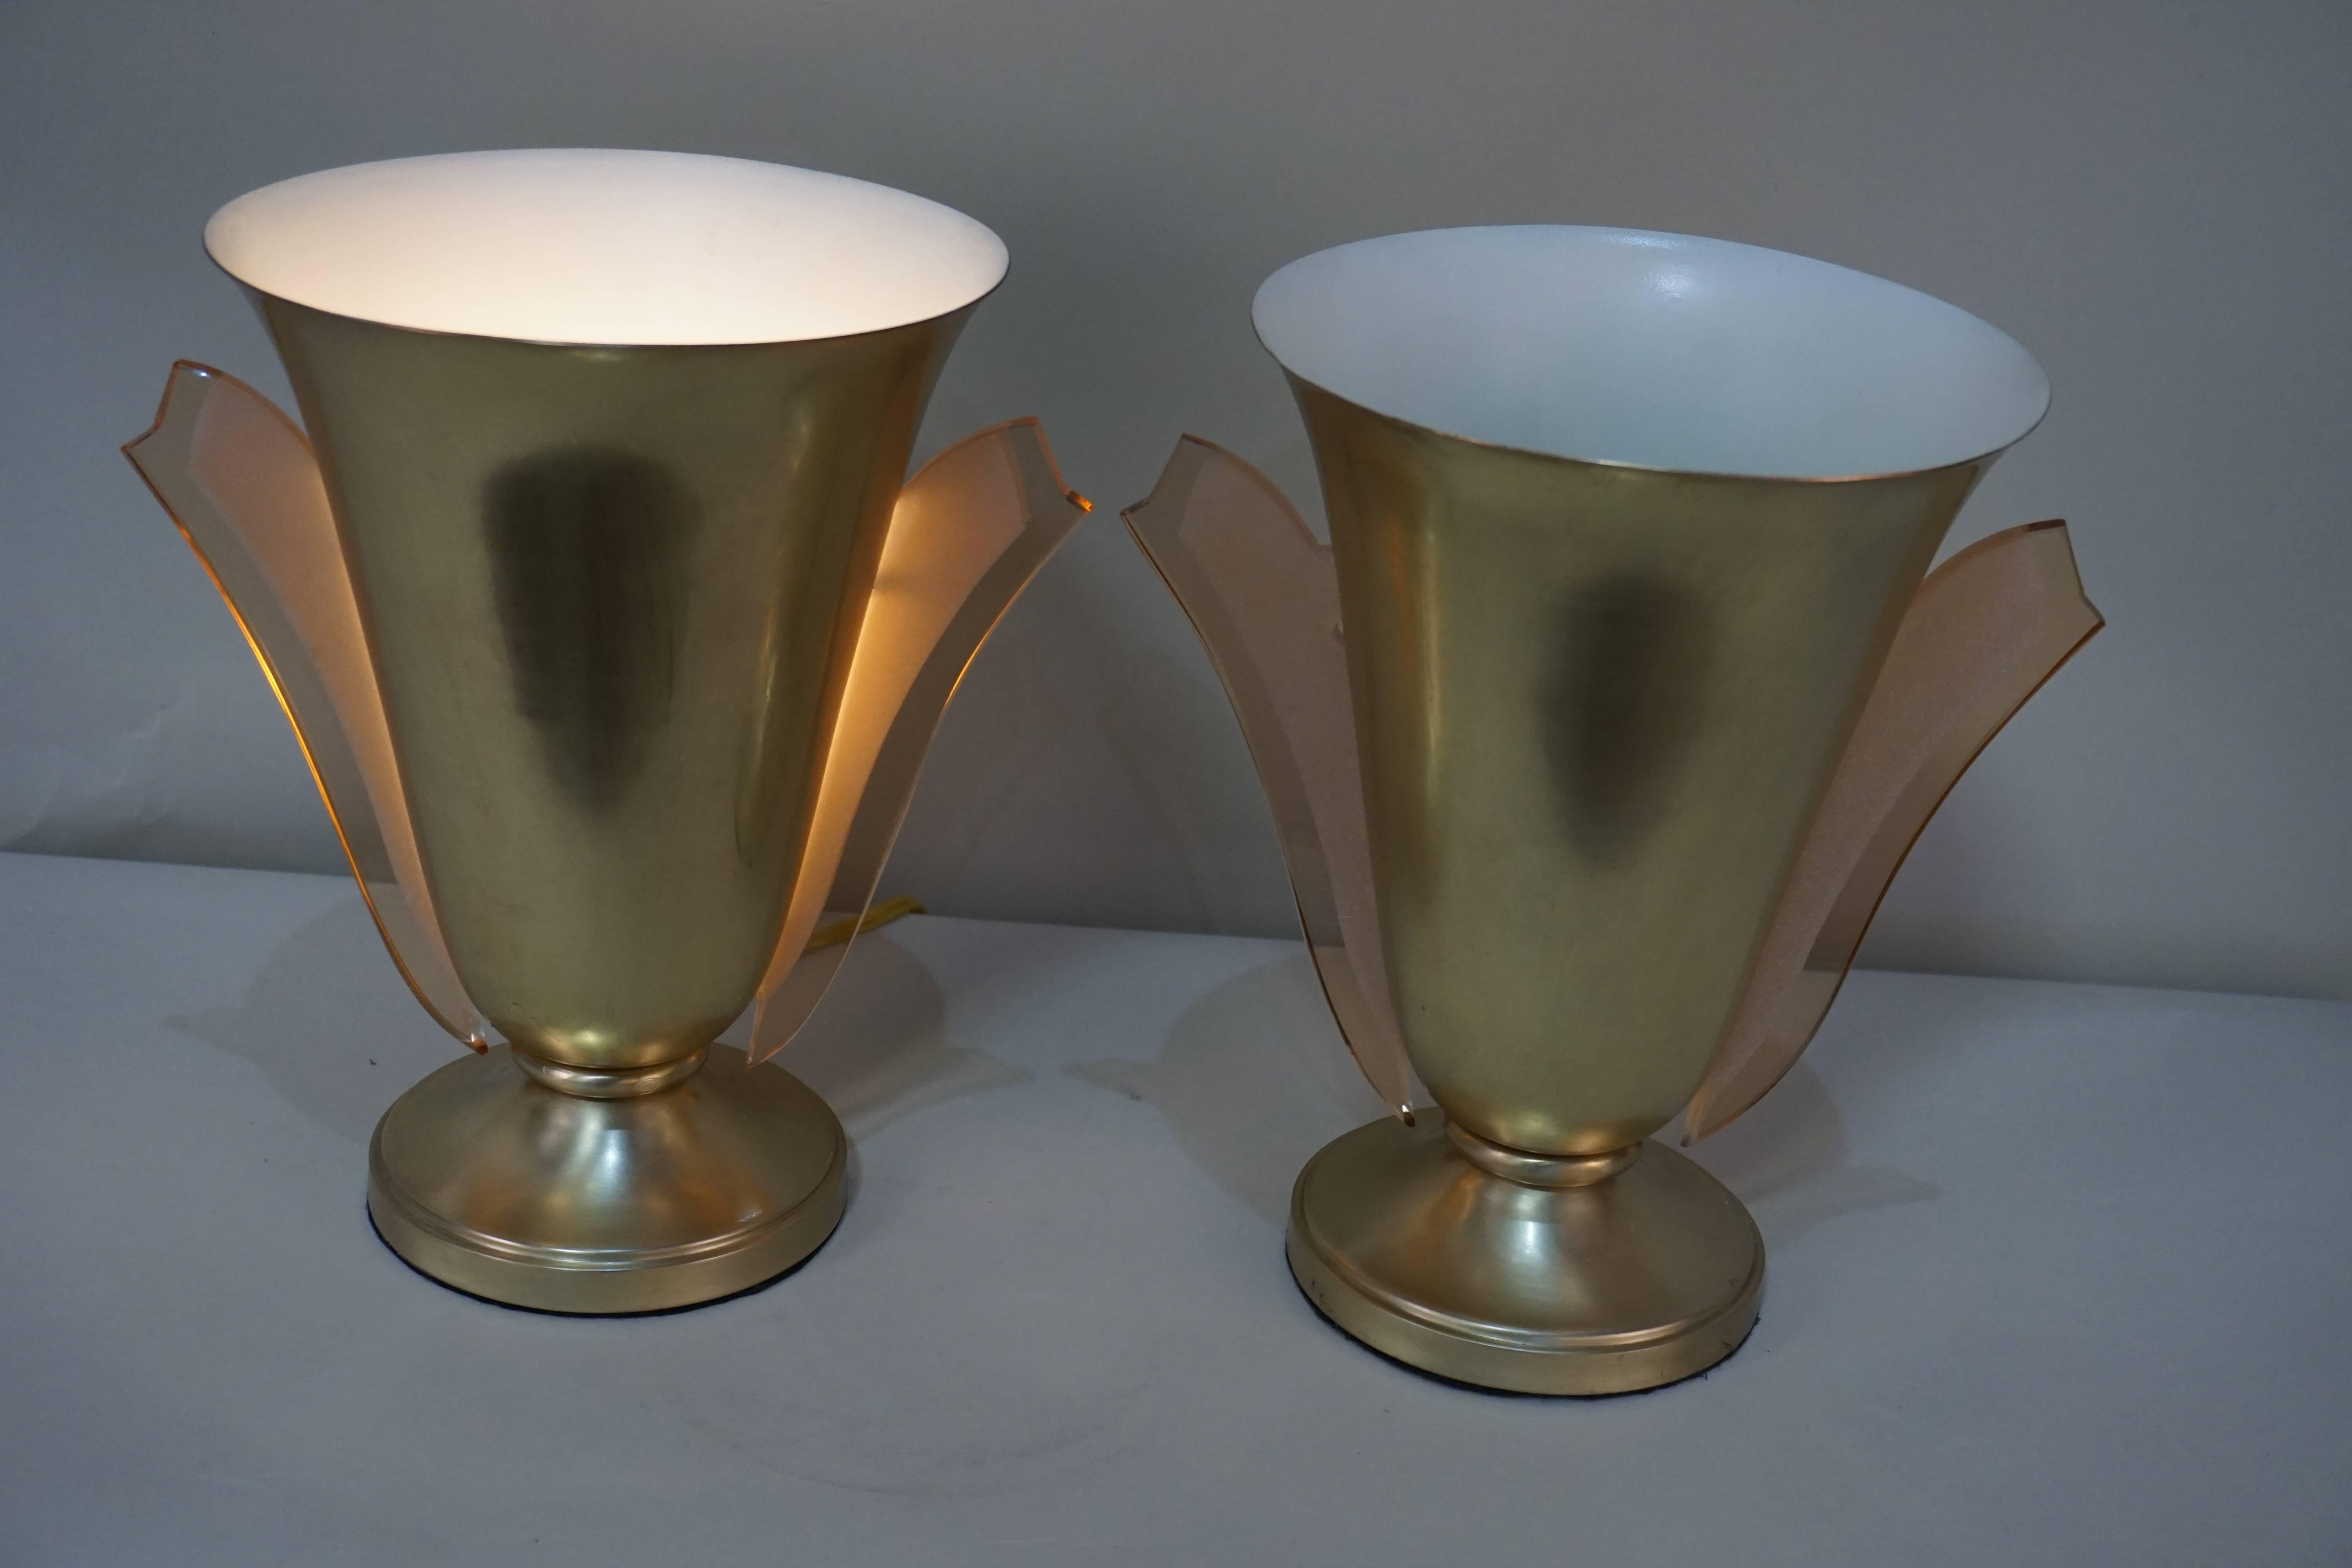 Pair of French Art Deco bronze table lamps with beige or pink glass panels by Atelier Petitot.